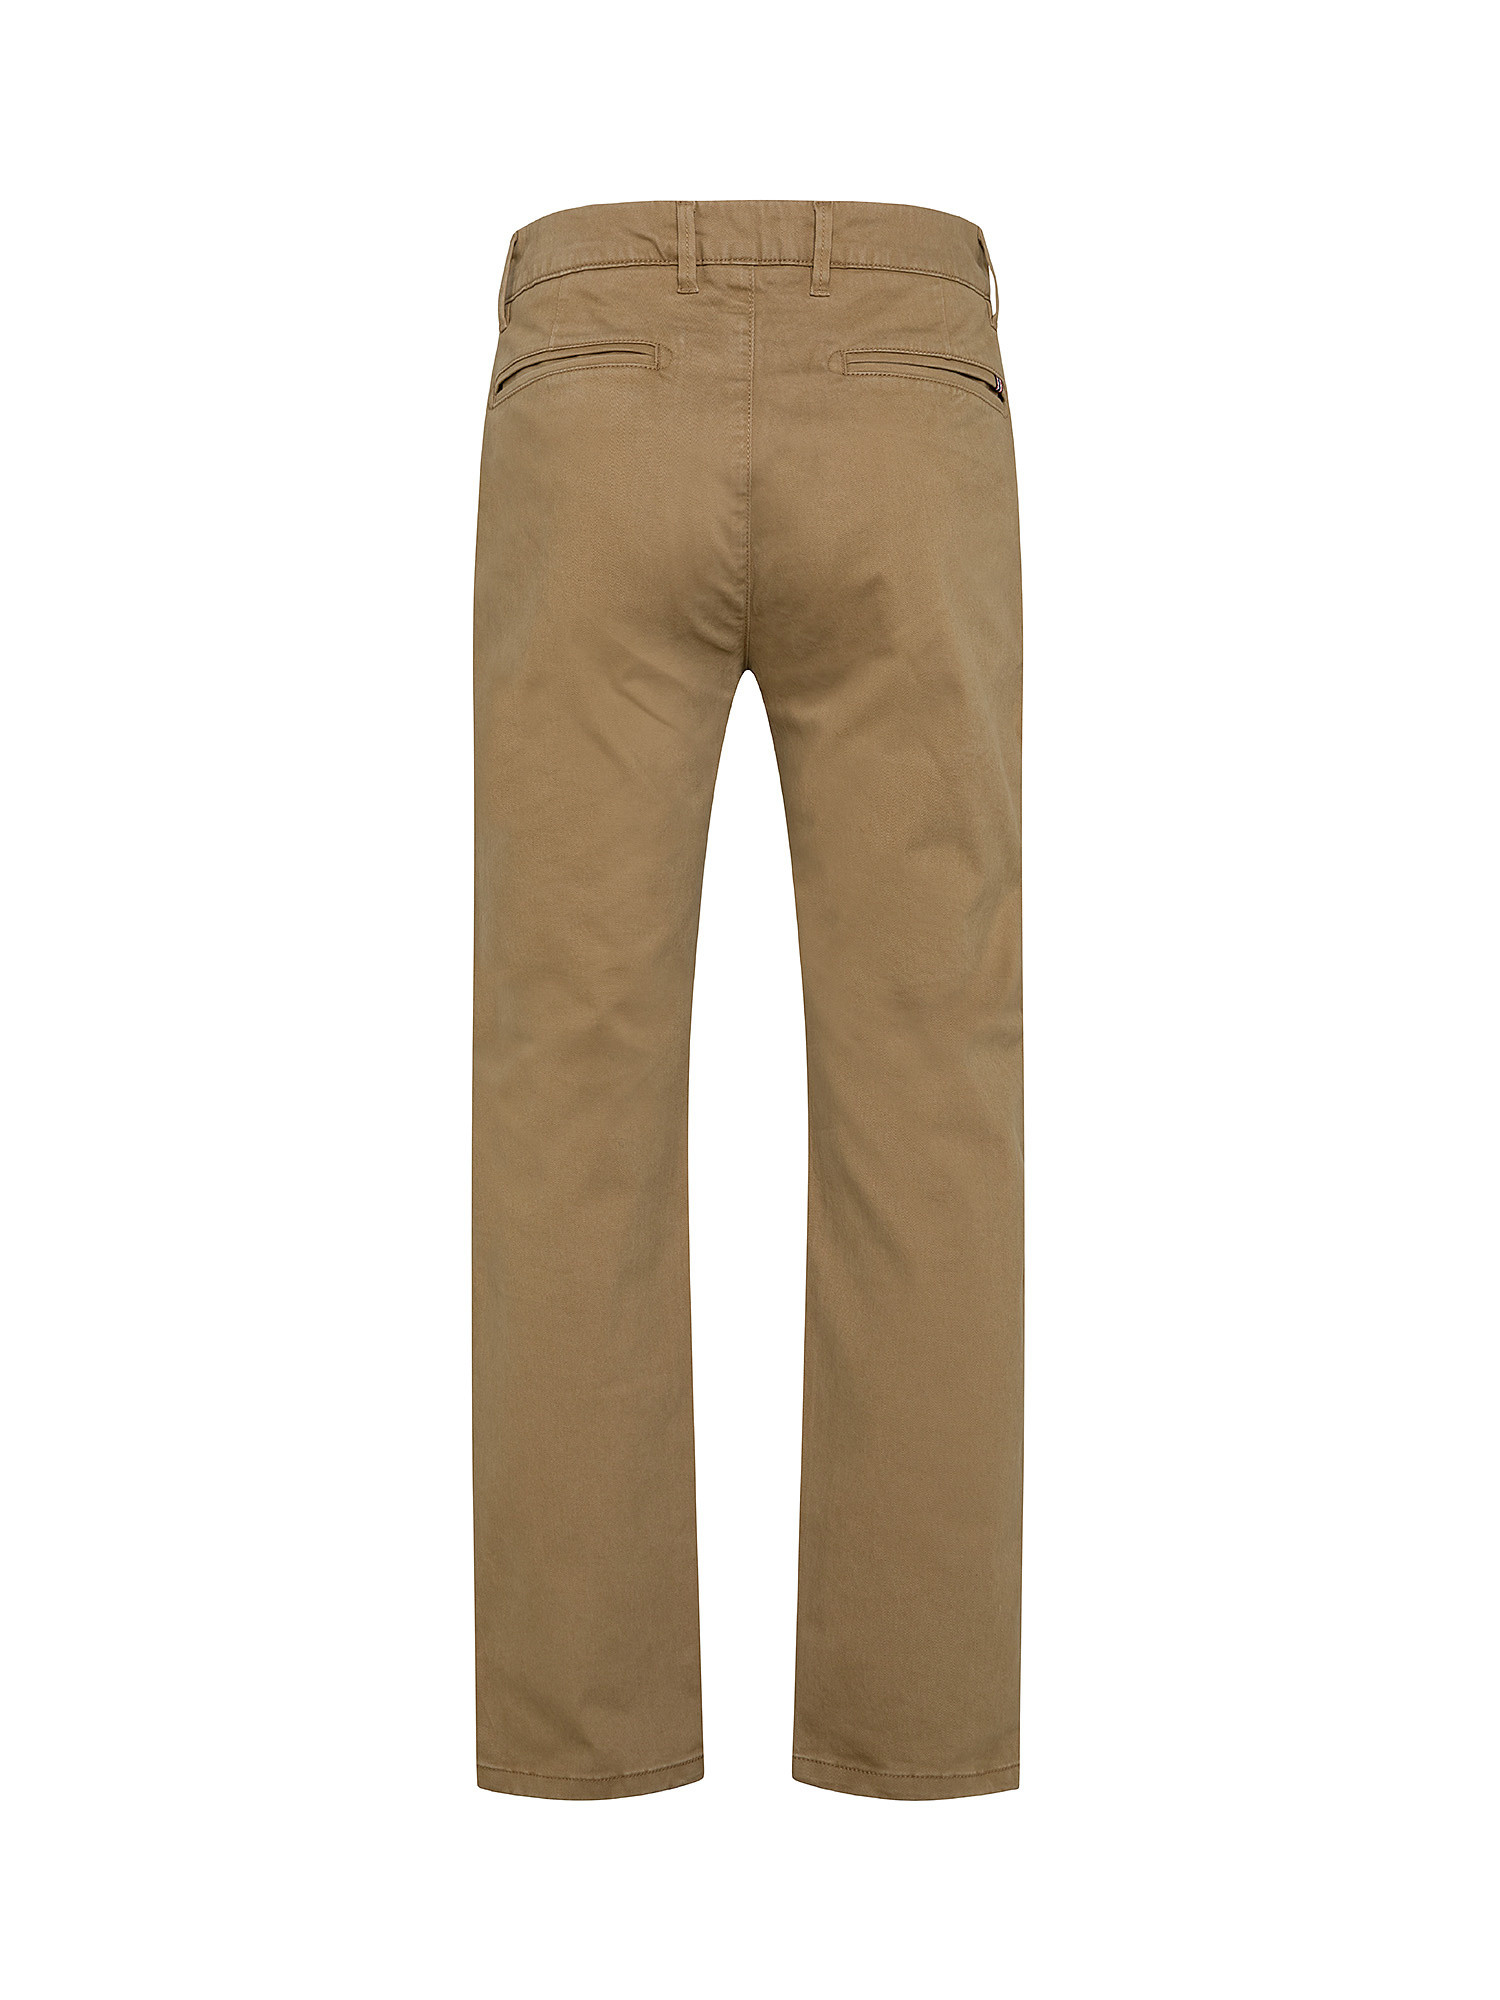 Stretch cotton chinos trousers, Light Brown, large image number 1